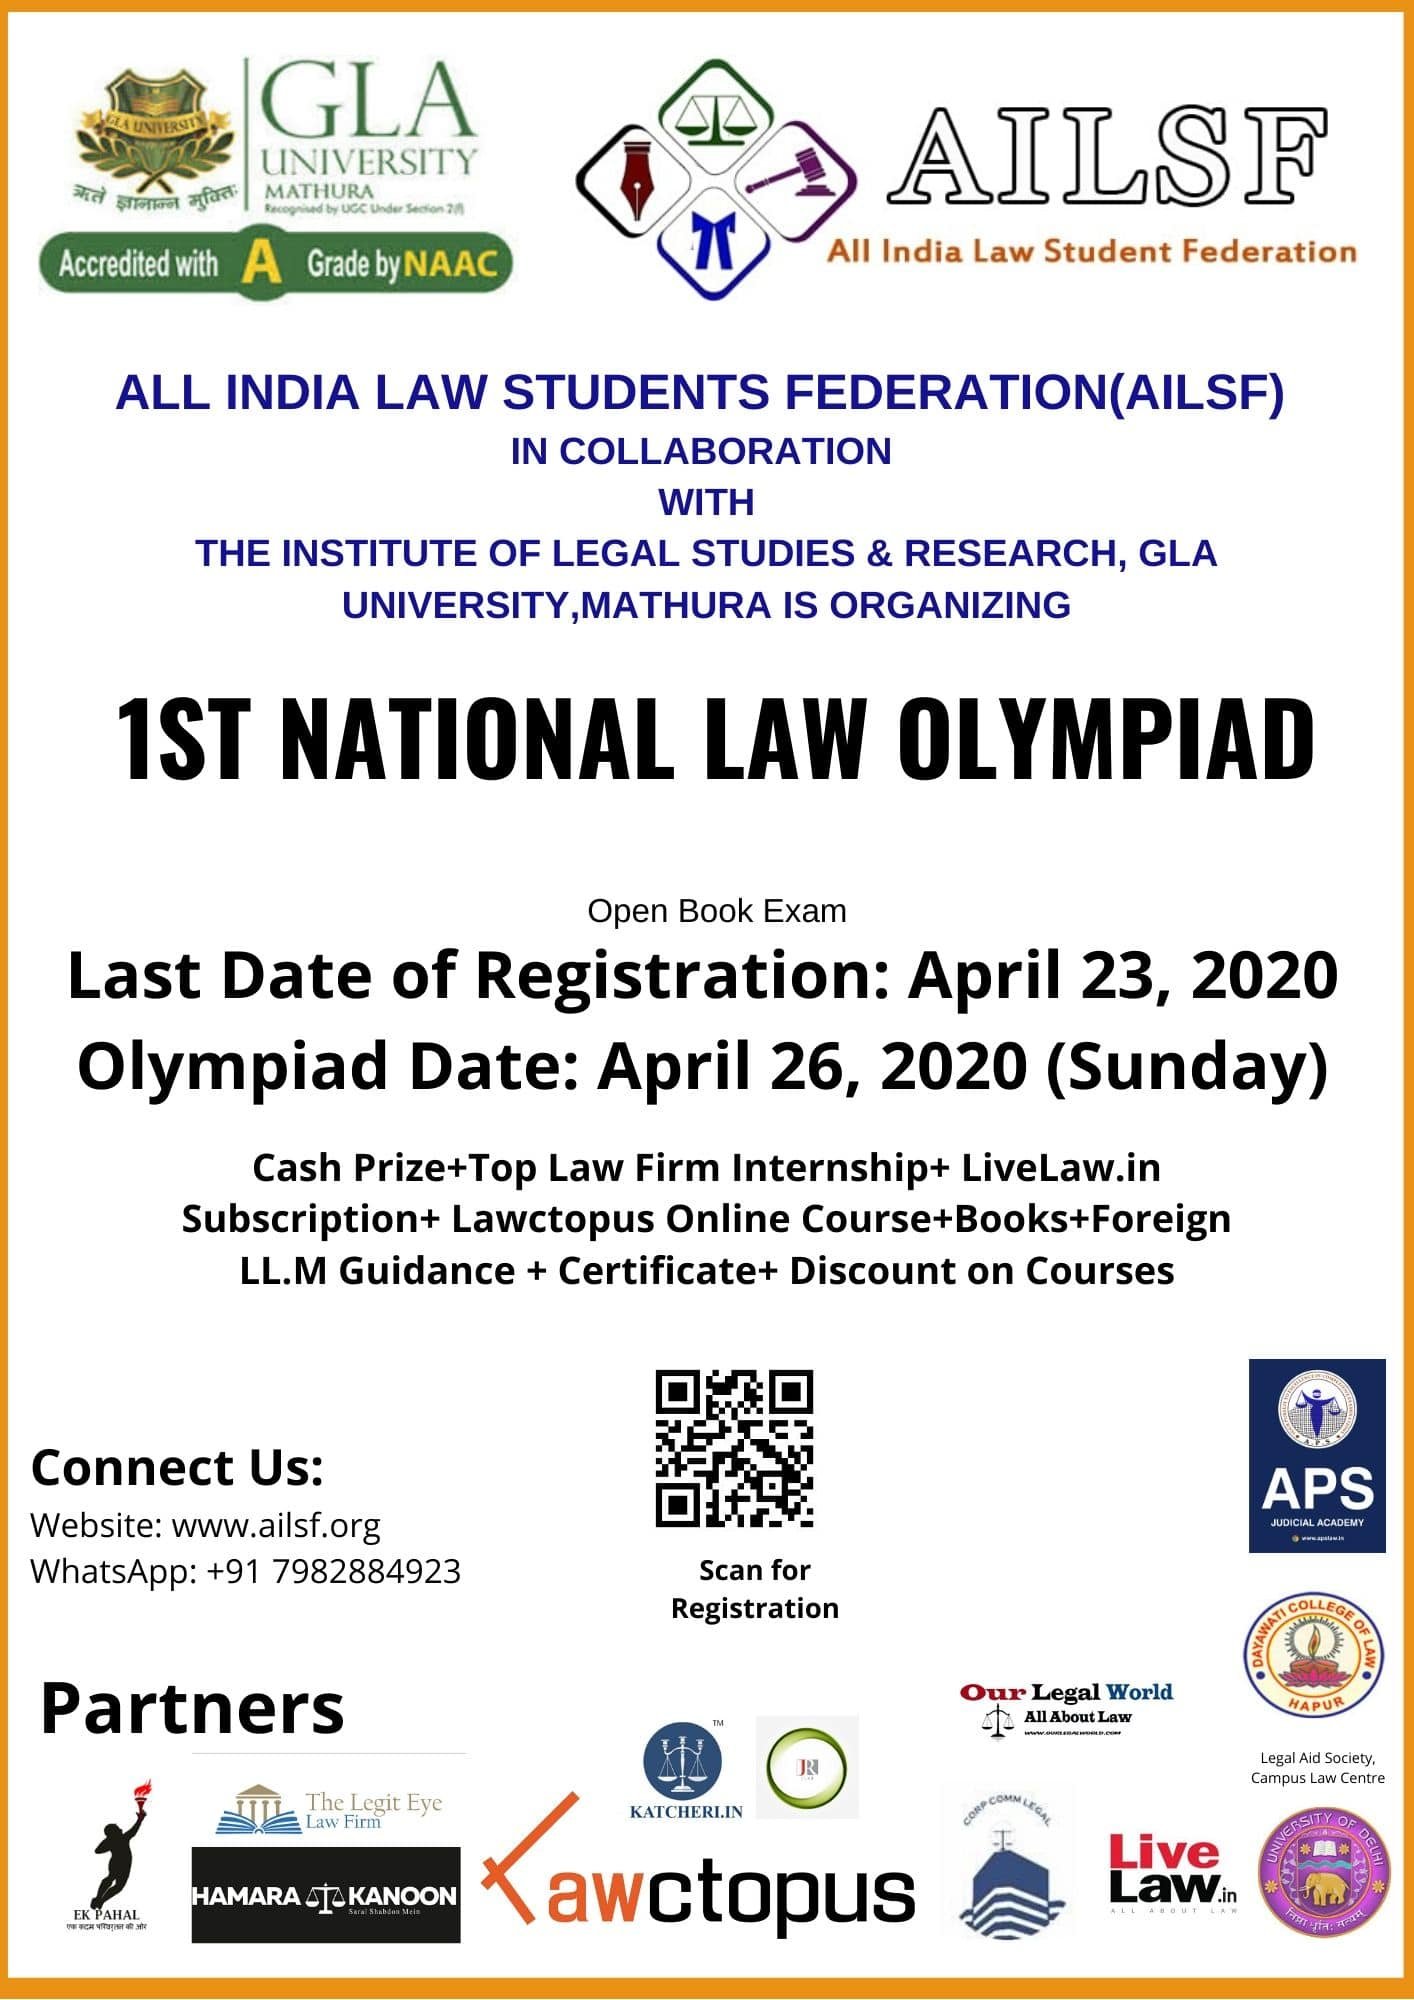 1st National Law Olympiad by All India Law Students Federation: Register Now